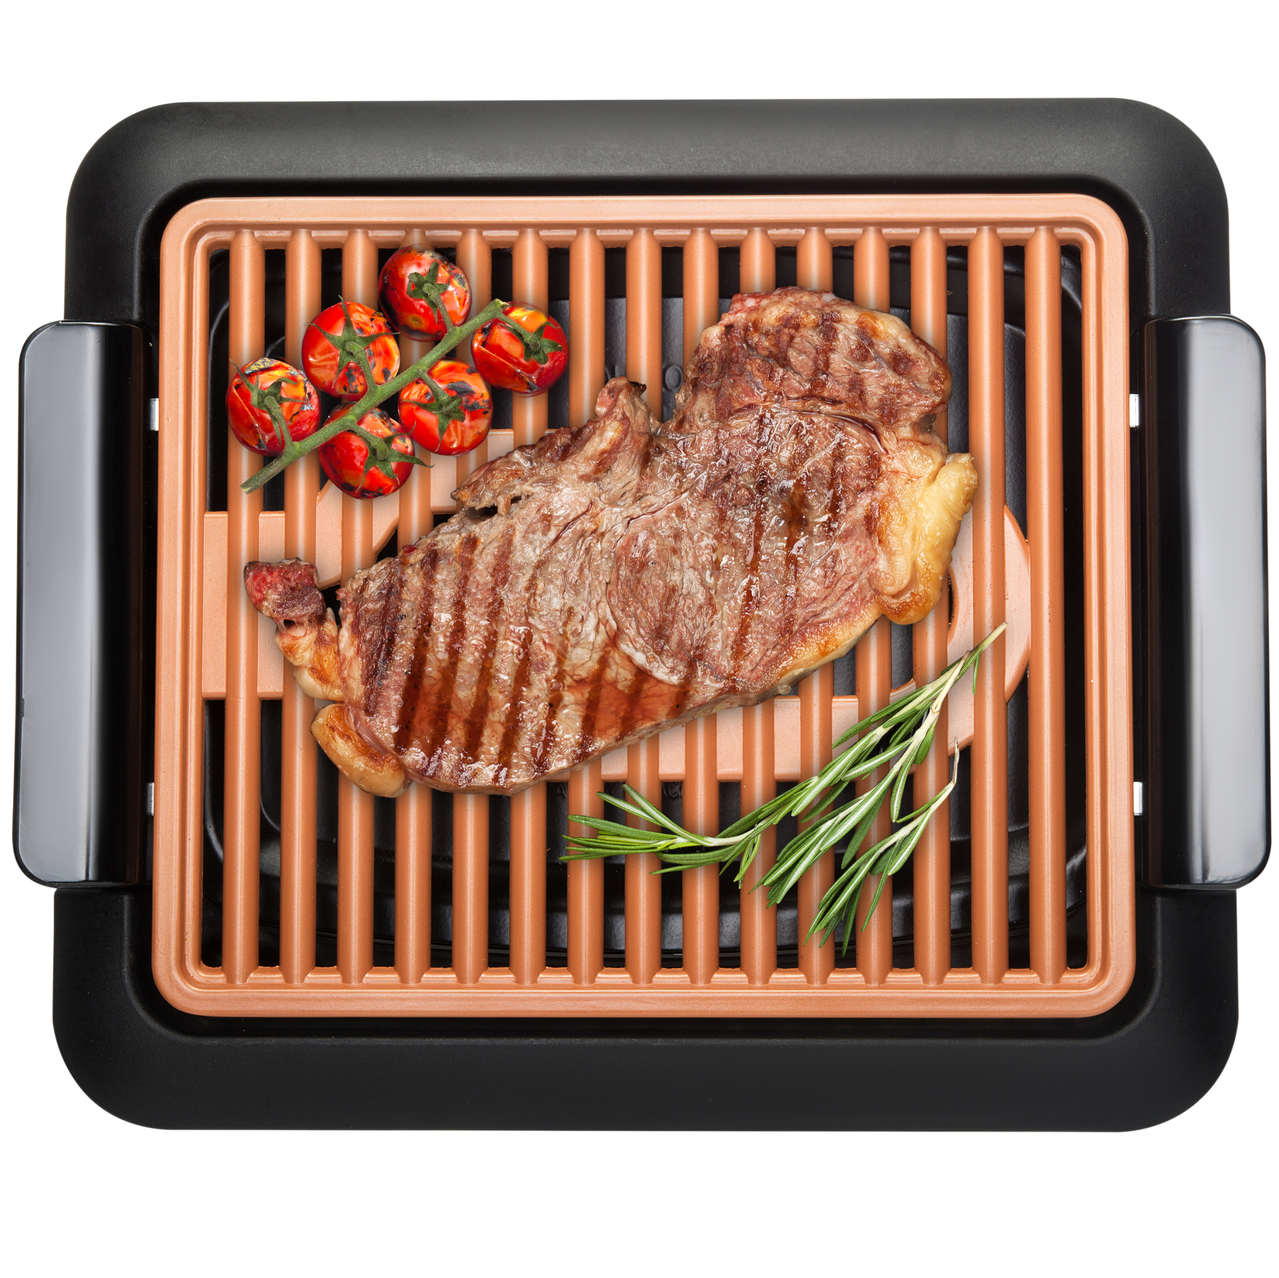 Gotham Steel Smokeless Indoor Grill, Ultra Nonstick Electric Grill, Dishwasher Safe Surface, Temp Control, Metal Utensil Safe, Barbeque Indoors with No Smoke! - image 1 of 7